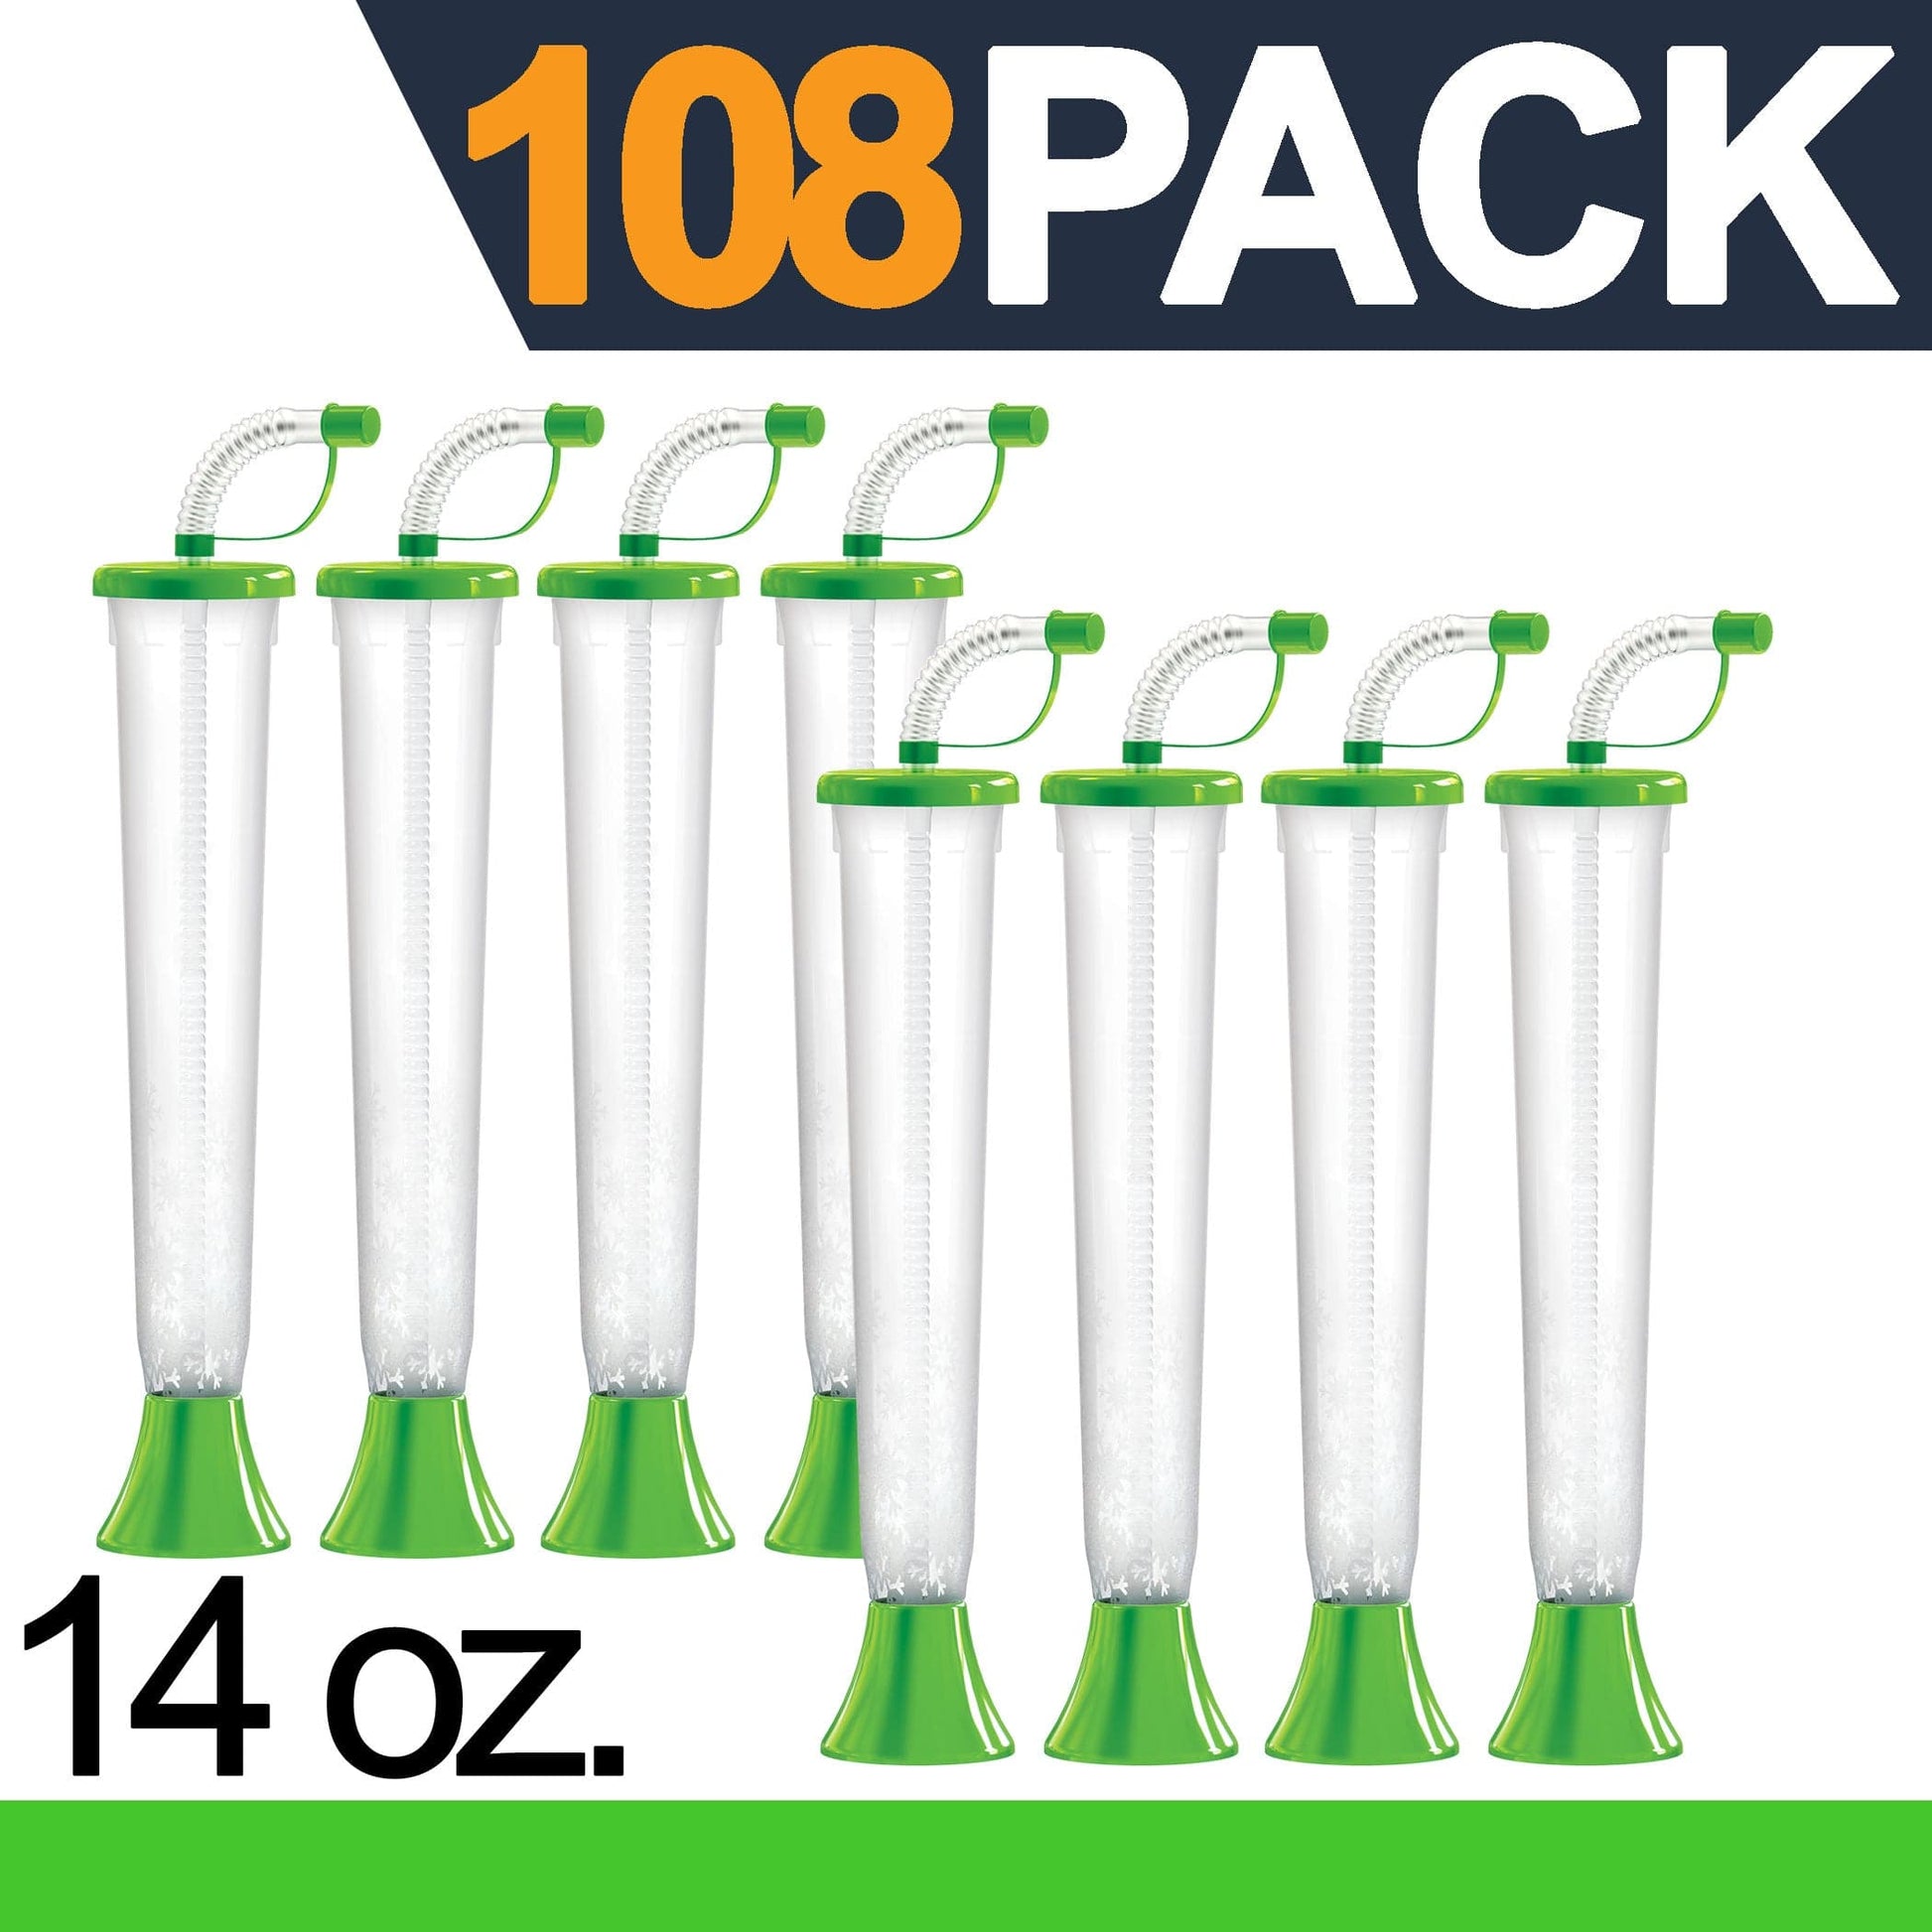 Sweet World USA Yard Cups 108 Cups Yard Cups with LIME Lids and Straws - for Margaritas, Cold and Frozen Drinks, Kids Party - 14 oz. (400 ml) cups with lids and straws